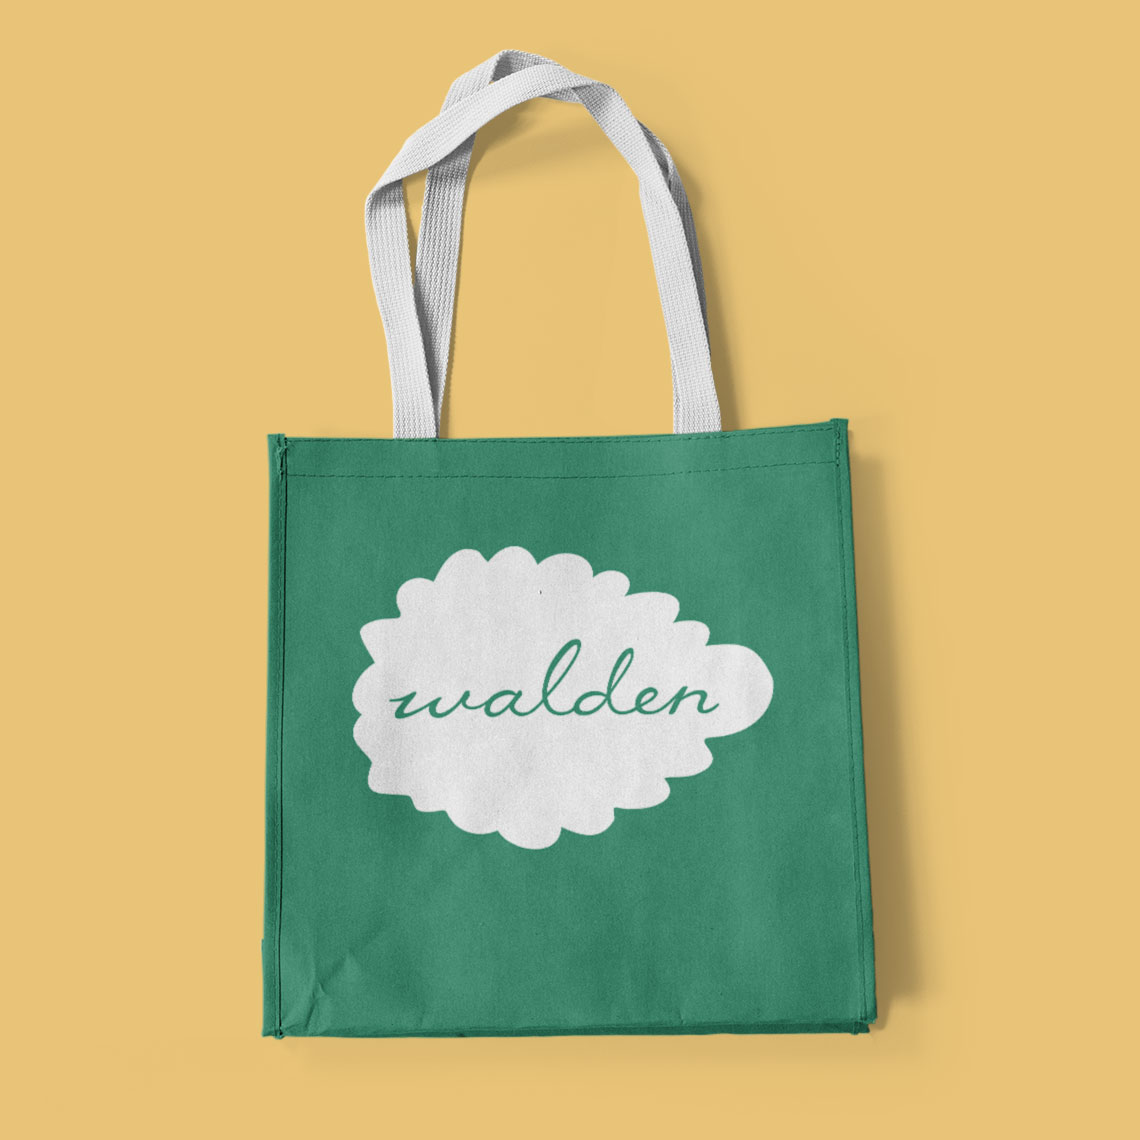 Totebag from the Walden School rebrand designed by Kilter